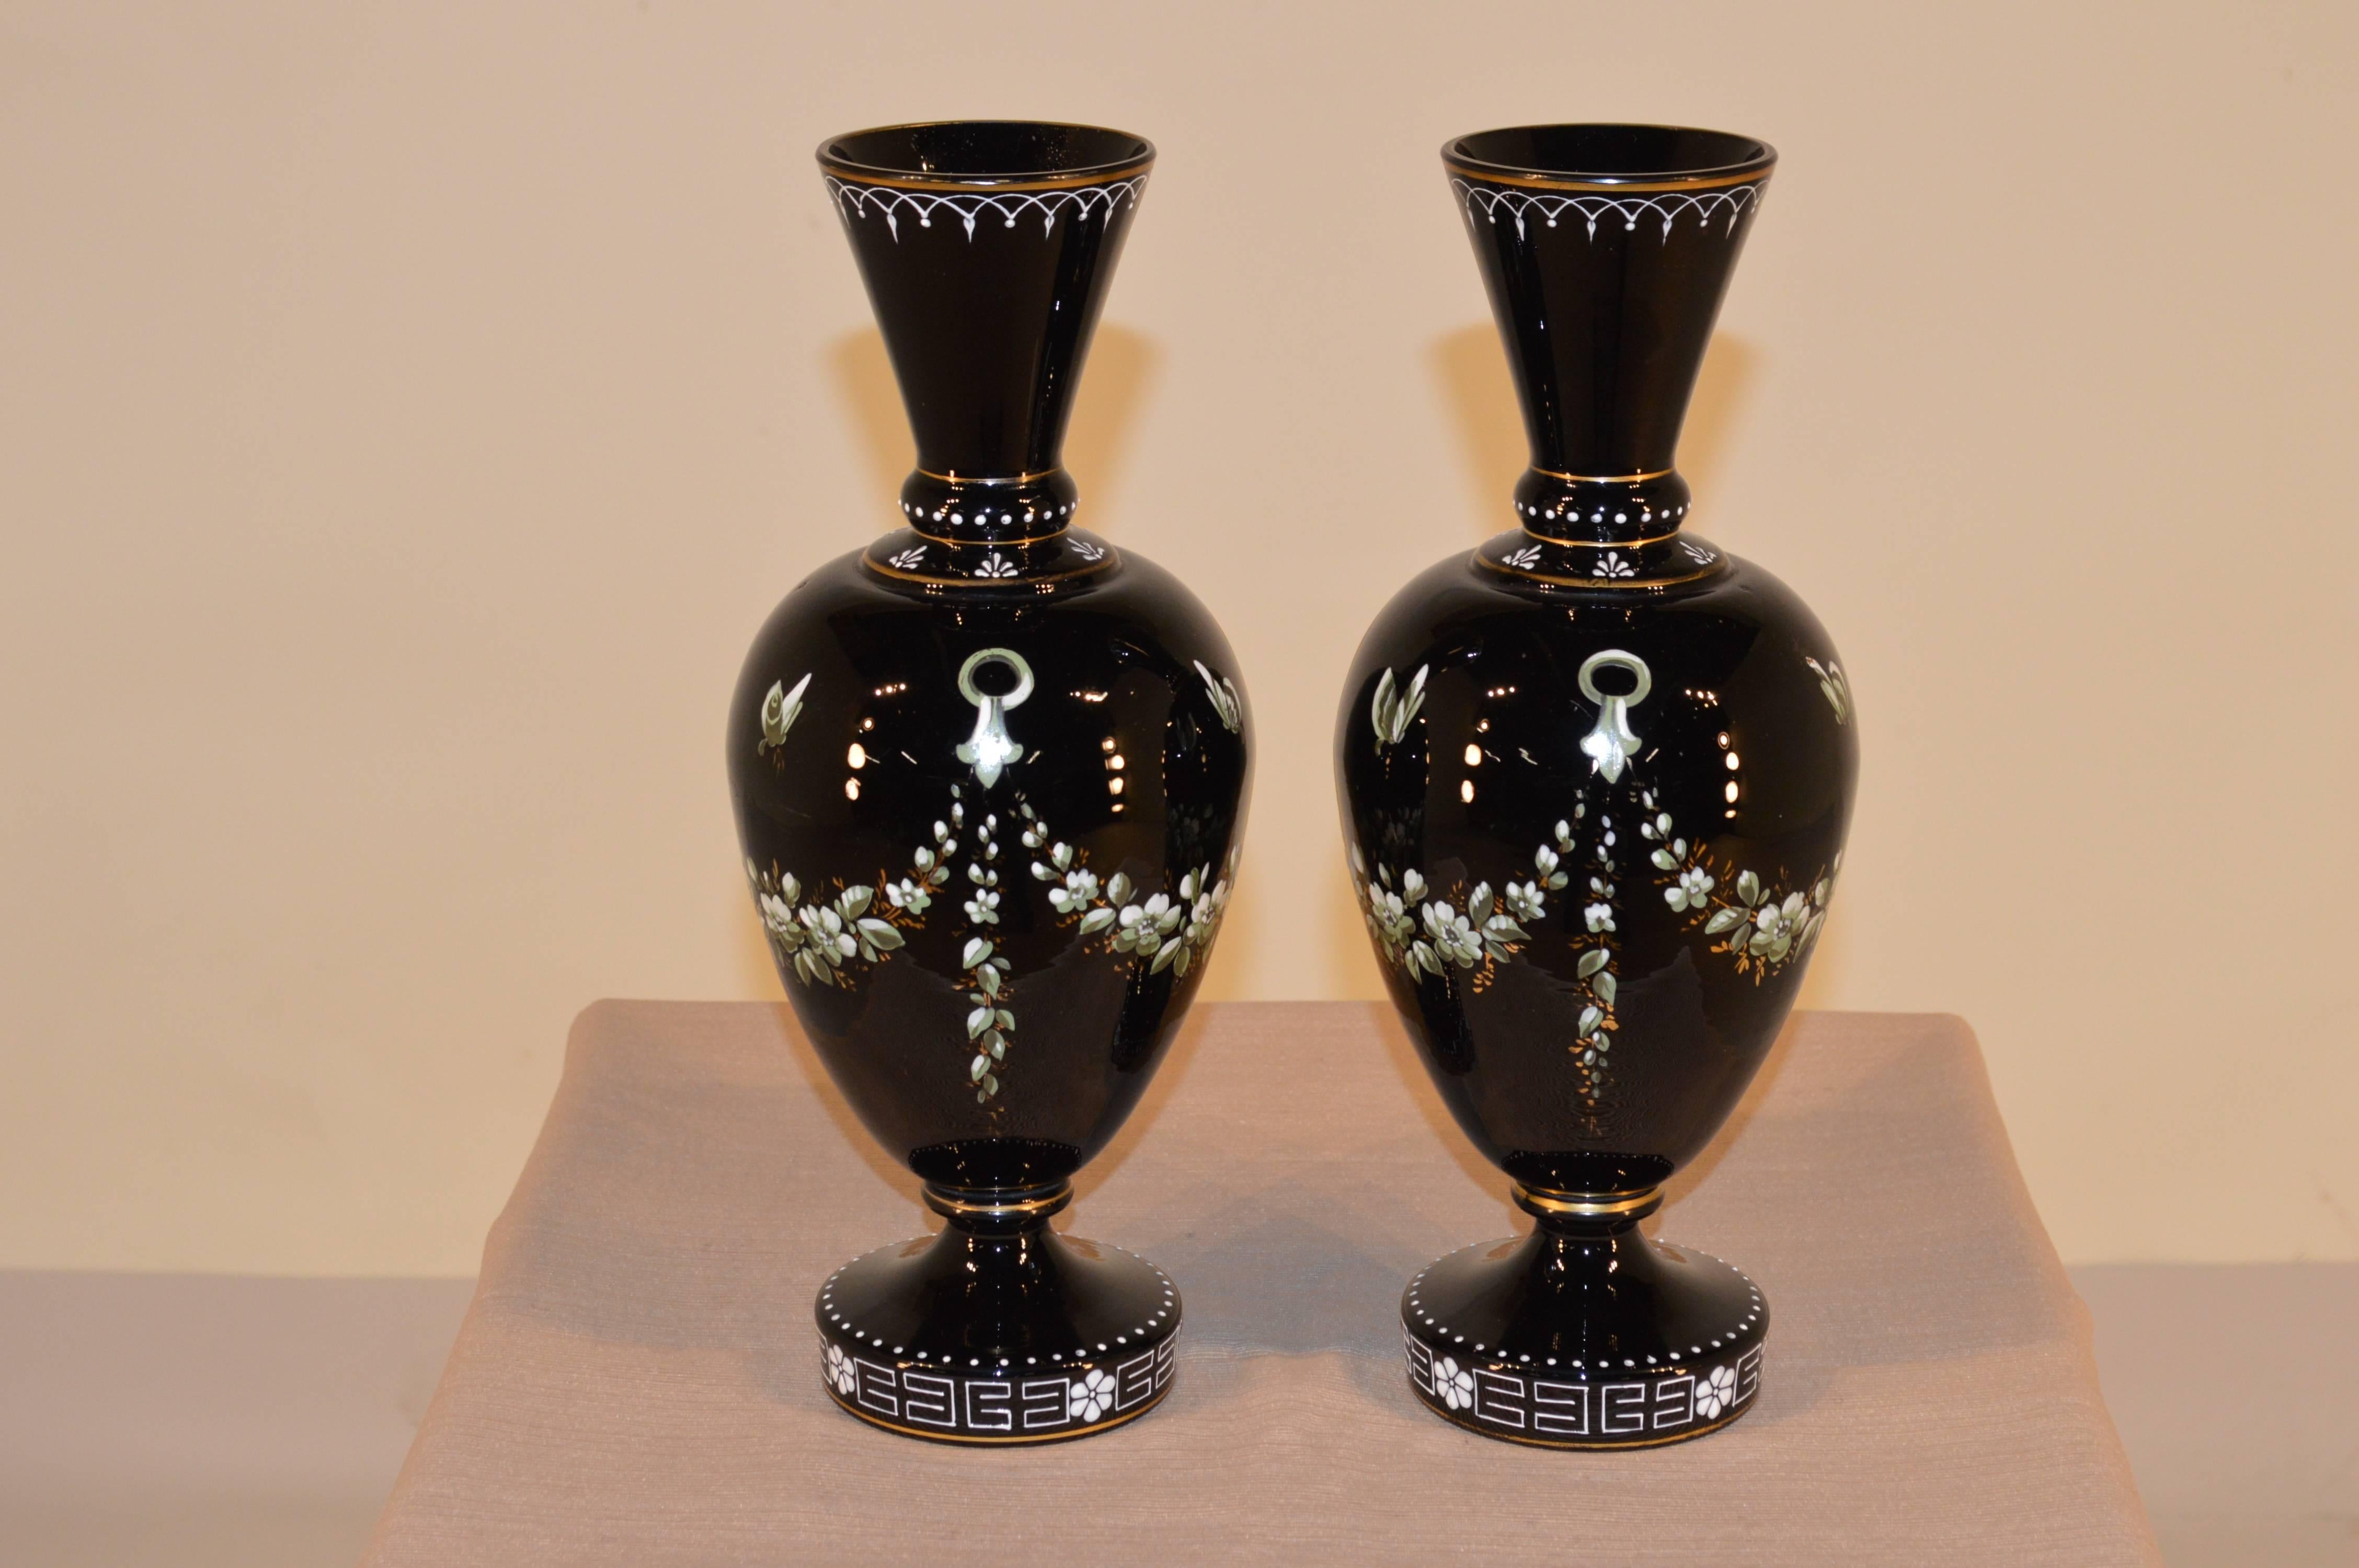 19th-C. Pair of French black amethyst glass vases with hand painted enamel and gold paint decoration depicting butterflies and garland swags.